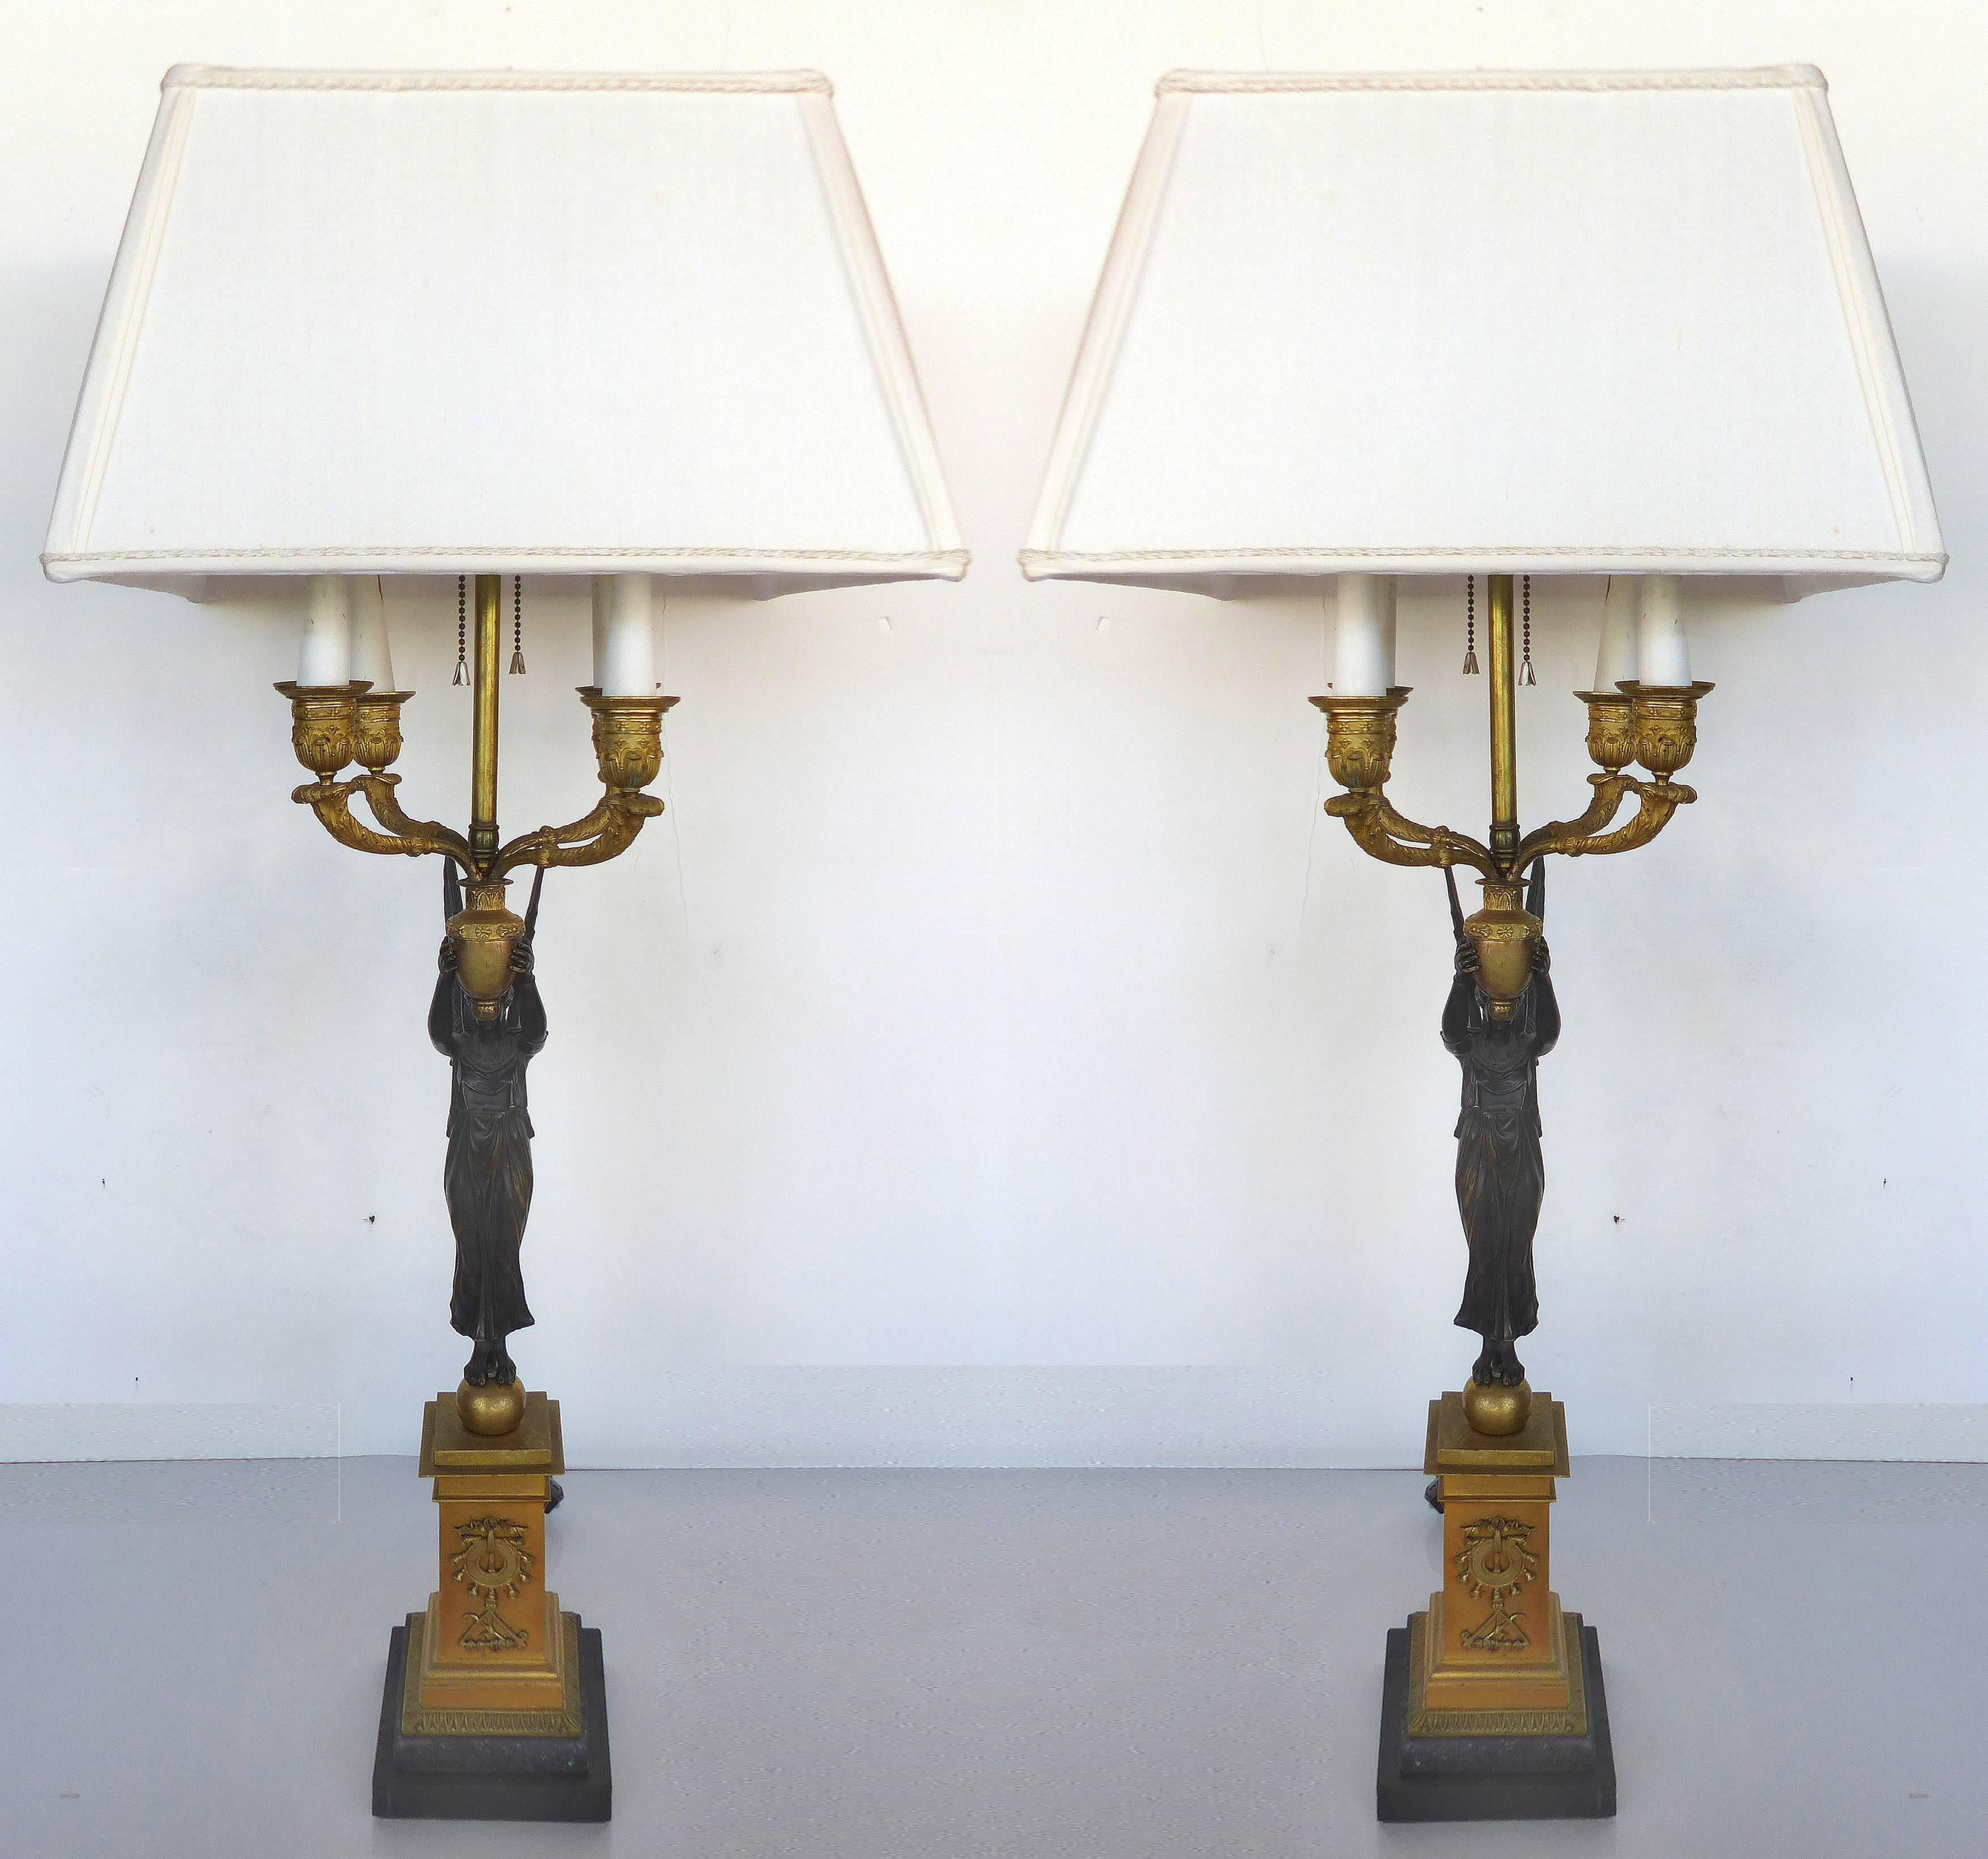 Fine French Empire 19th Century Bronze Candelabras Mounted as Lamps, Pair

A pair of fine French 19th century Empire bronze candelabras that have been electrified and converted to table lamps. Each has four removable carved wood faux-candles with